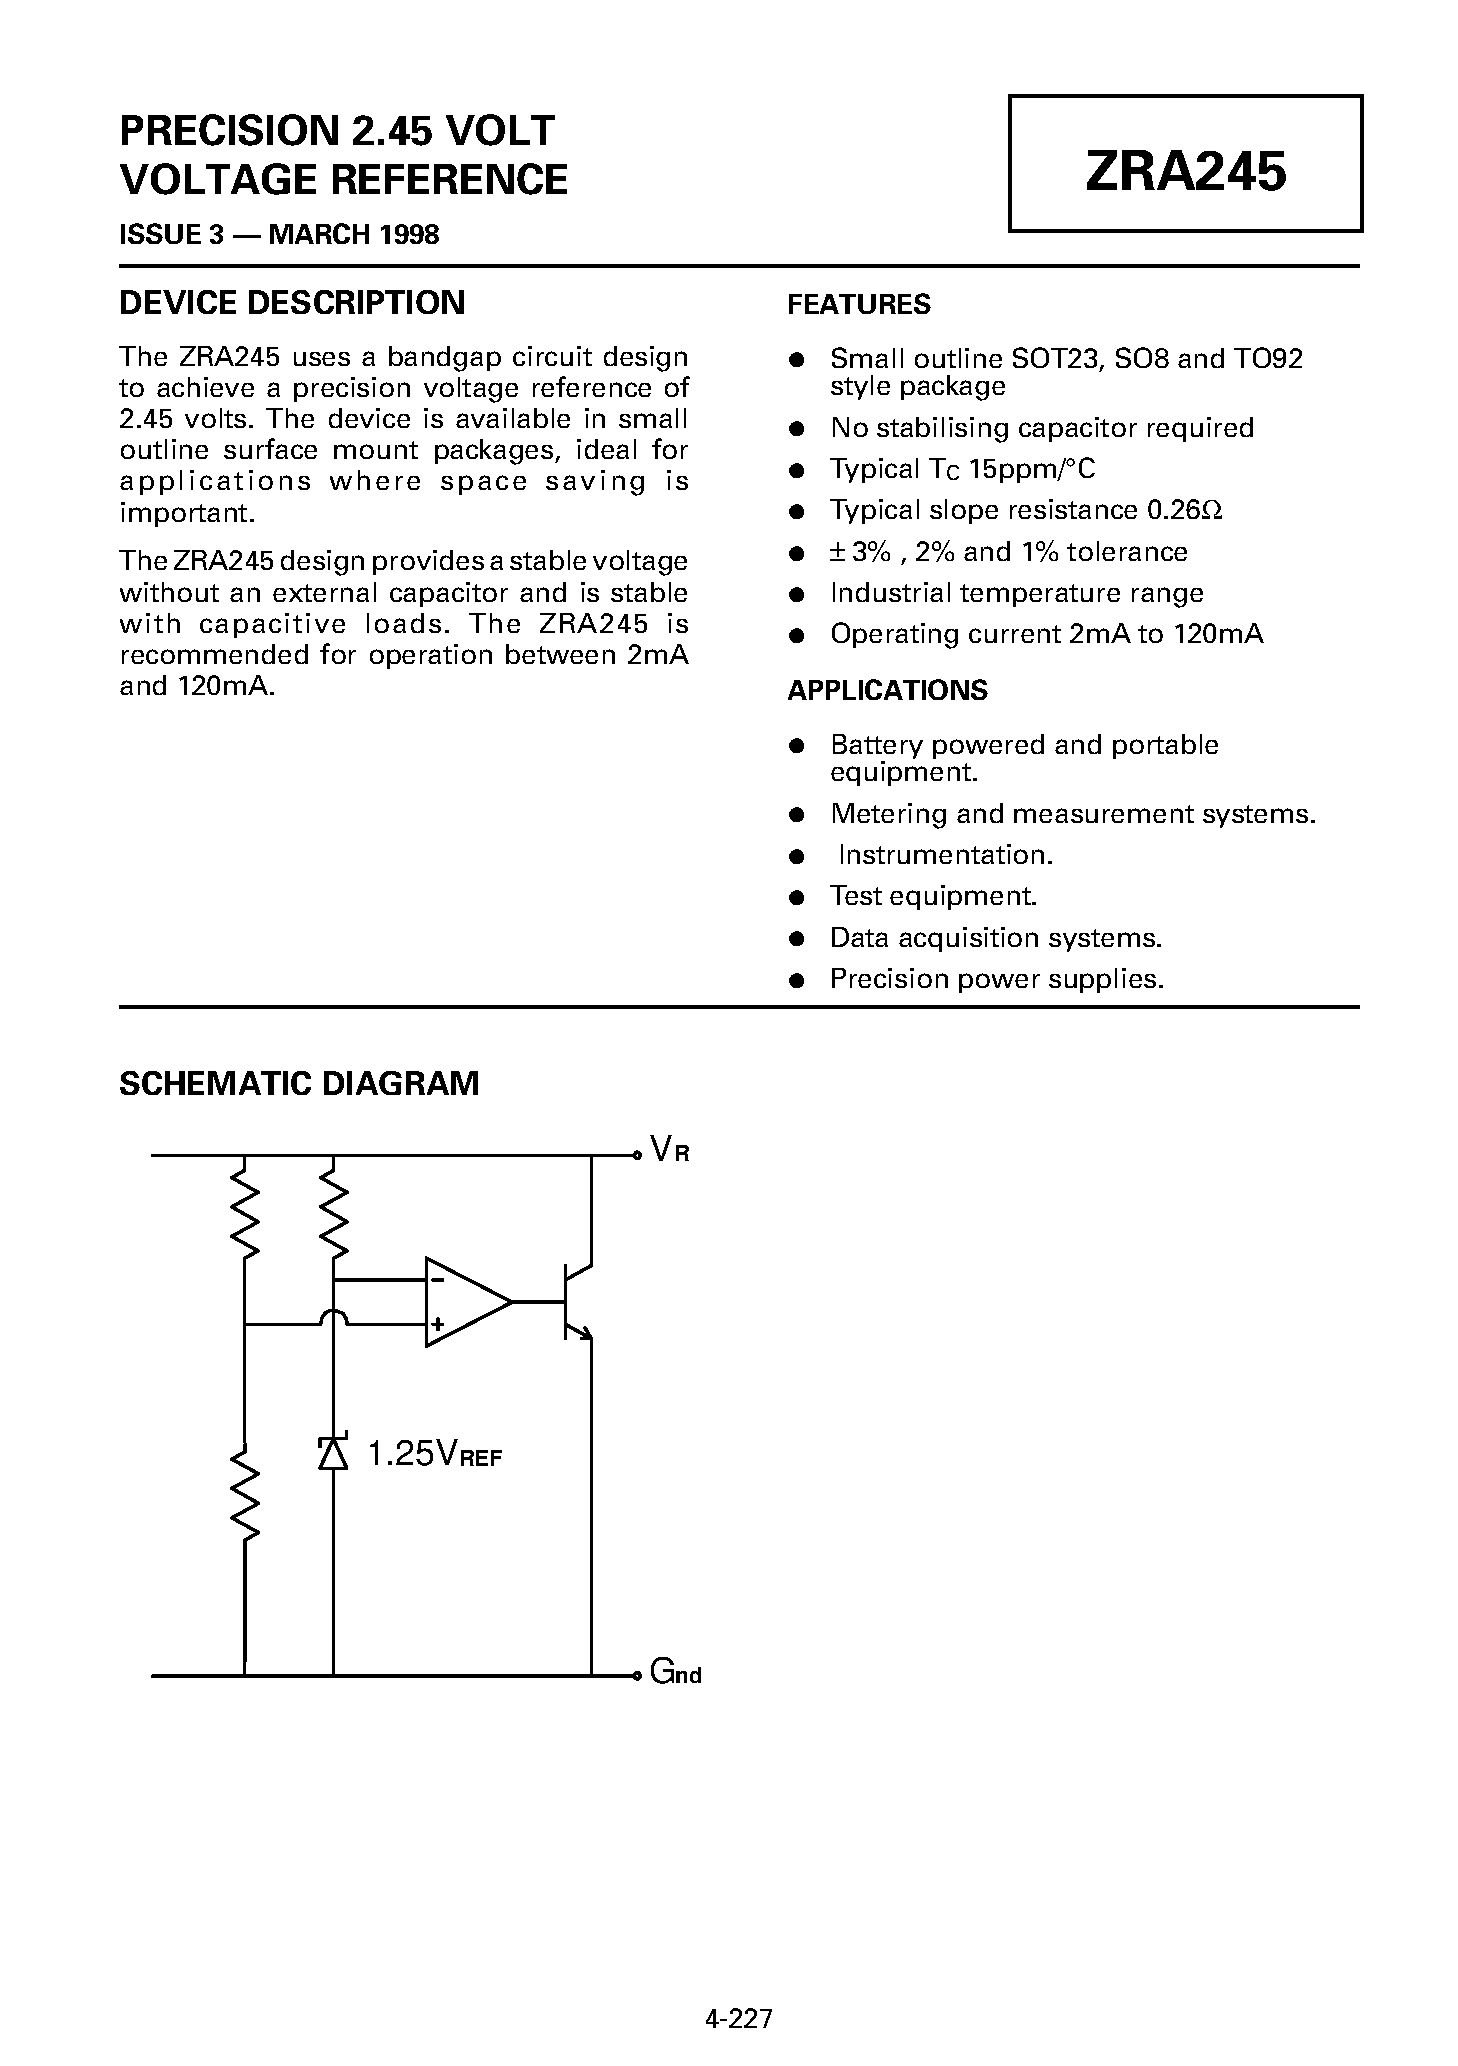 Datasheet ZRA245F03 - PRECISION 2.45 VOLT VOLTAGE REFERENCE page 1